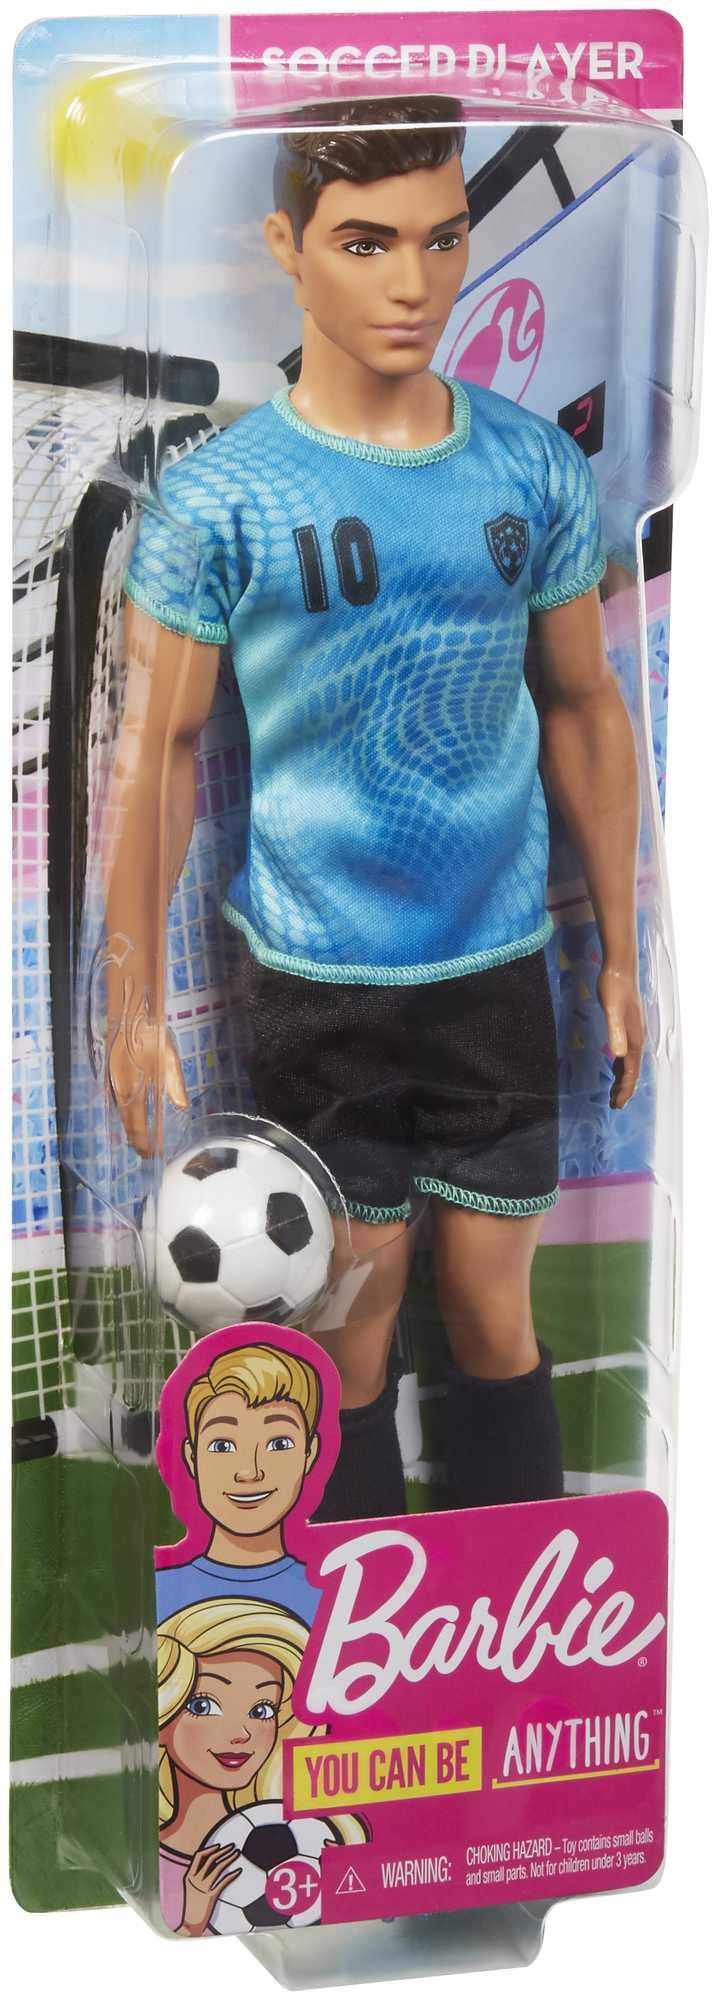 Ken Soccer Player Doll with Soccer Ball Wearing Soccer Uniform Accessorized with Soccer Socks and Cleats, Gift for 3 to 7 Year Olds